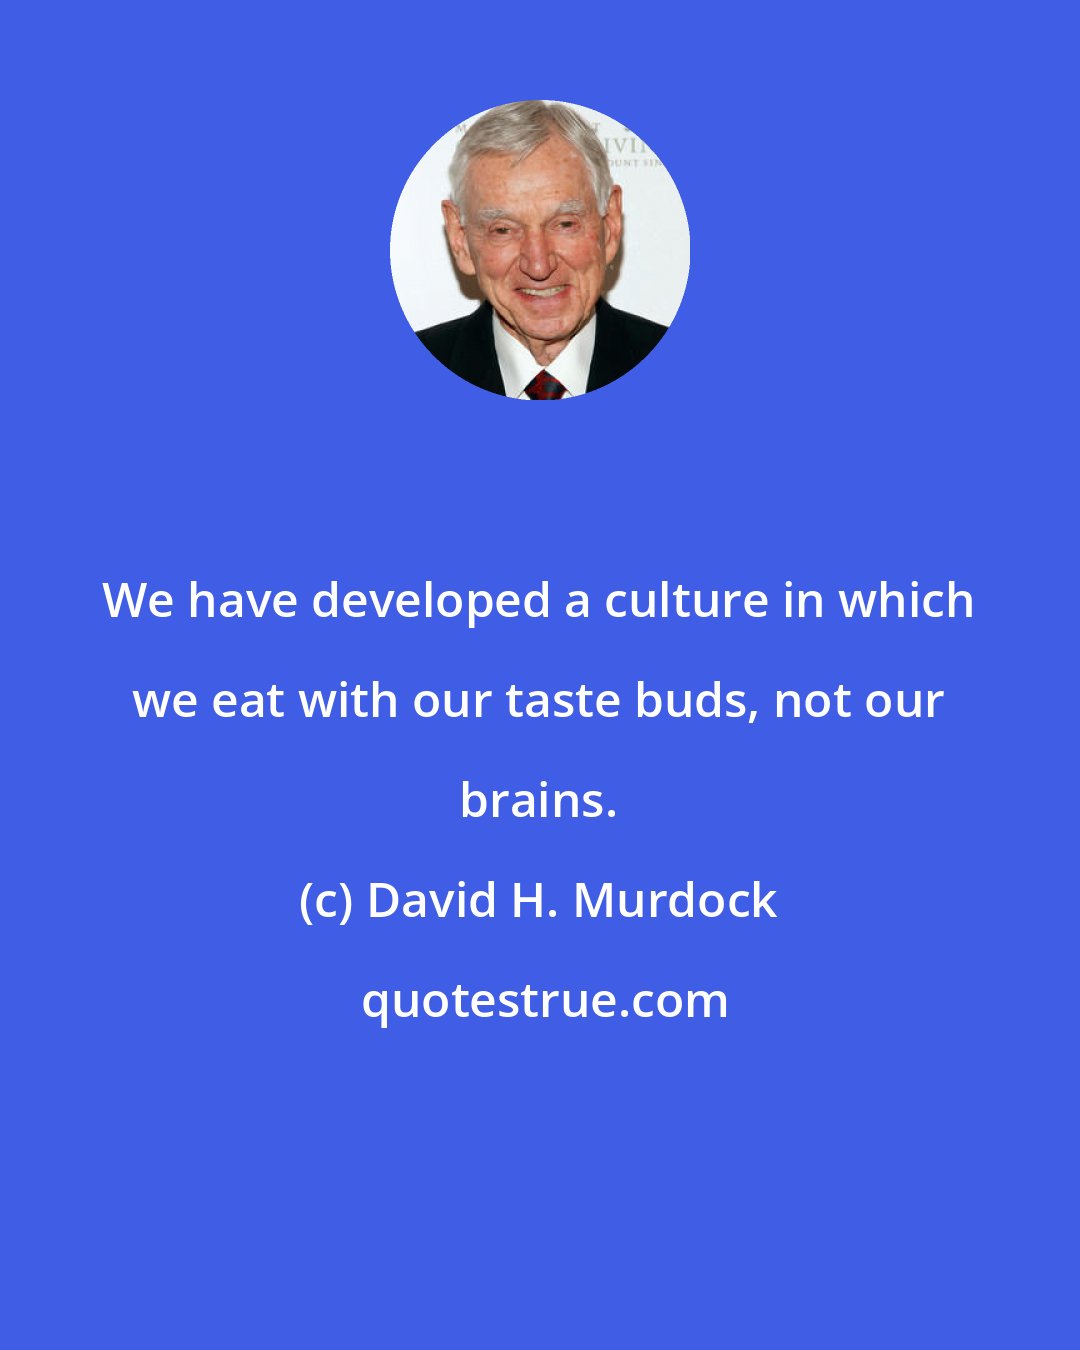 David H. Murdock: We have developed a culture in which we eat with our taste buds, not our brains.